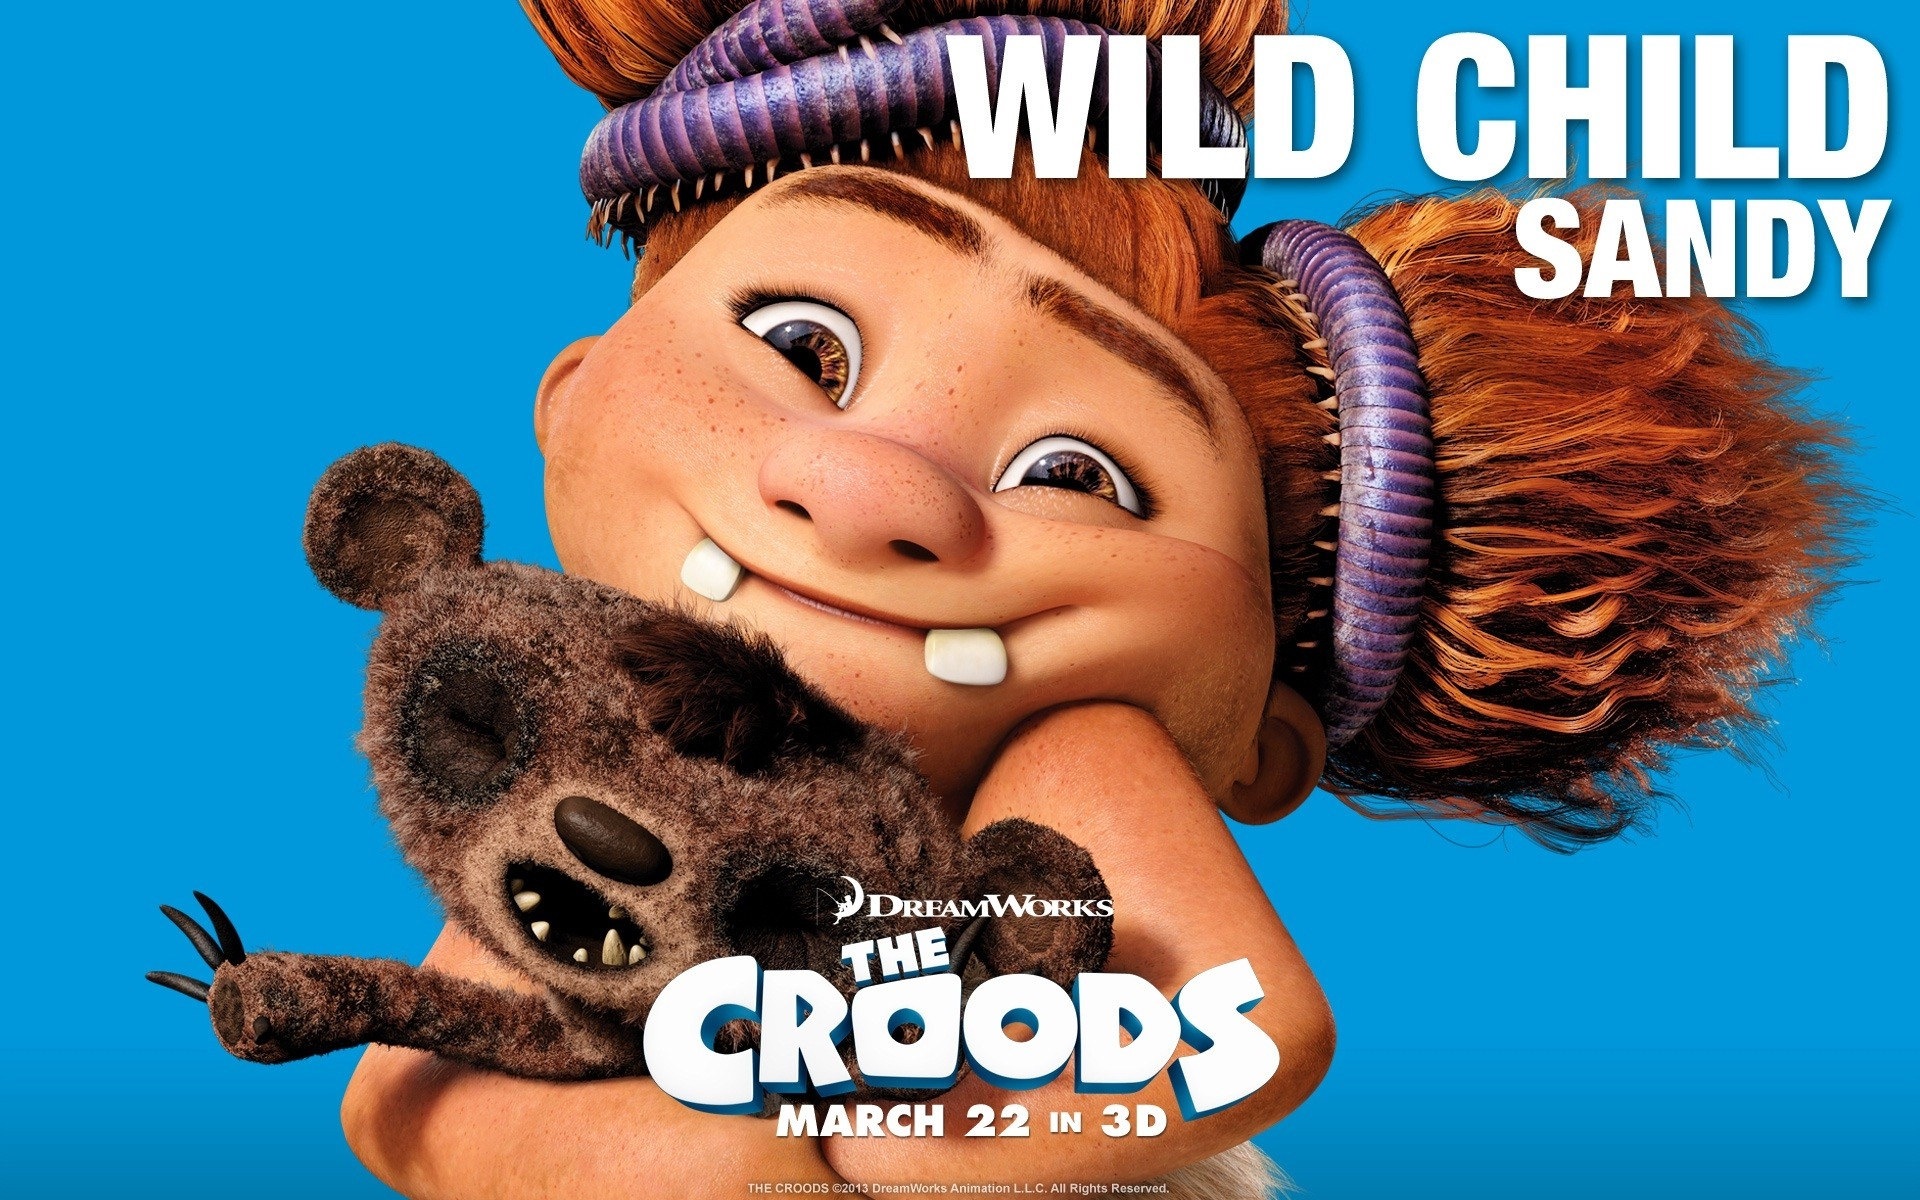 V Croods HD Movie Wallpapers #9 - 1920x1200